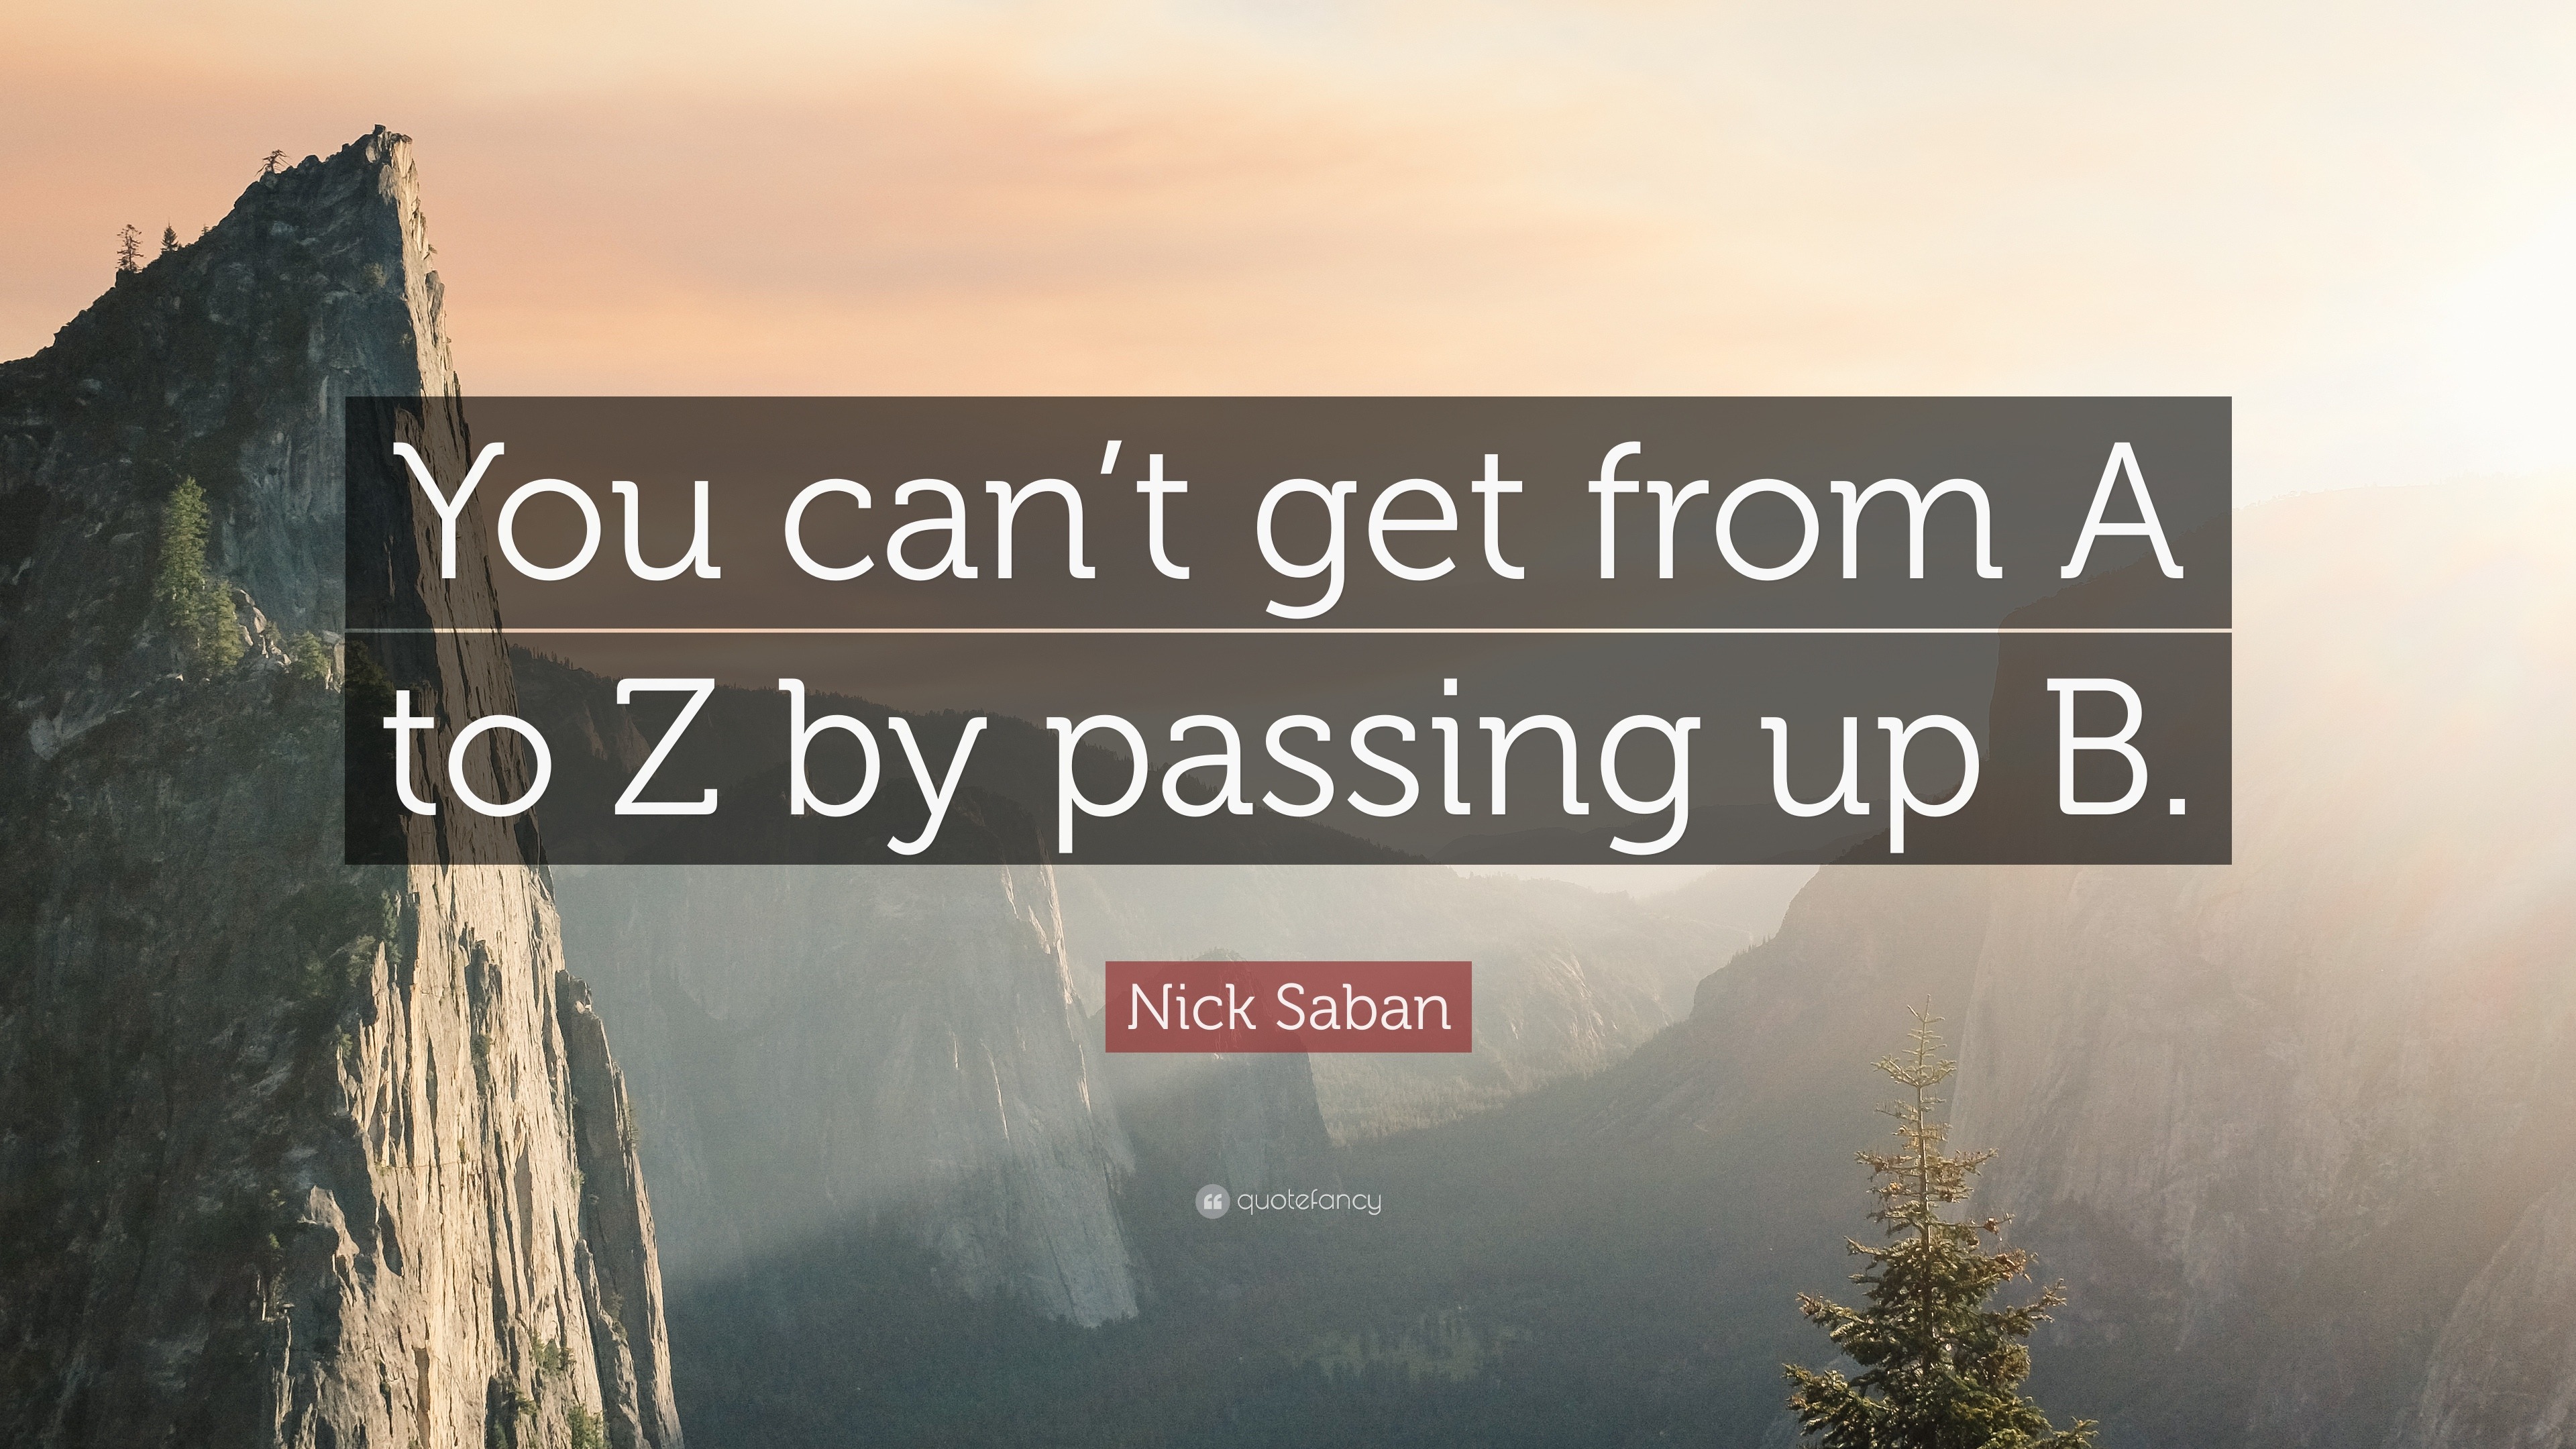 https://quotefancy.com/media/wallpaper/3840x2160/1210478-Nick-Saban-Quote-You-can-t-get-from-A-to-Z-by-passing-up-B.jpg